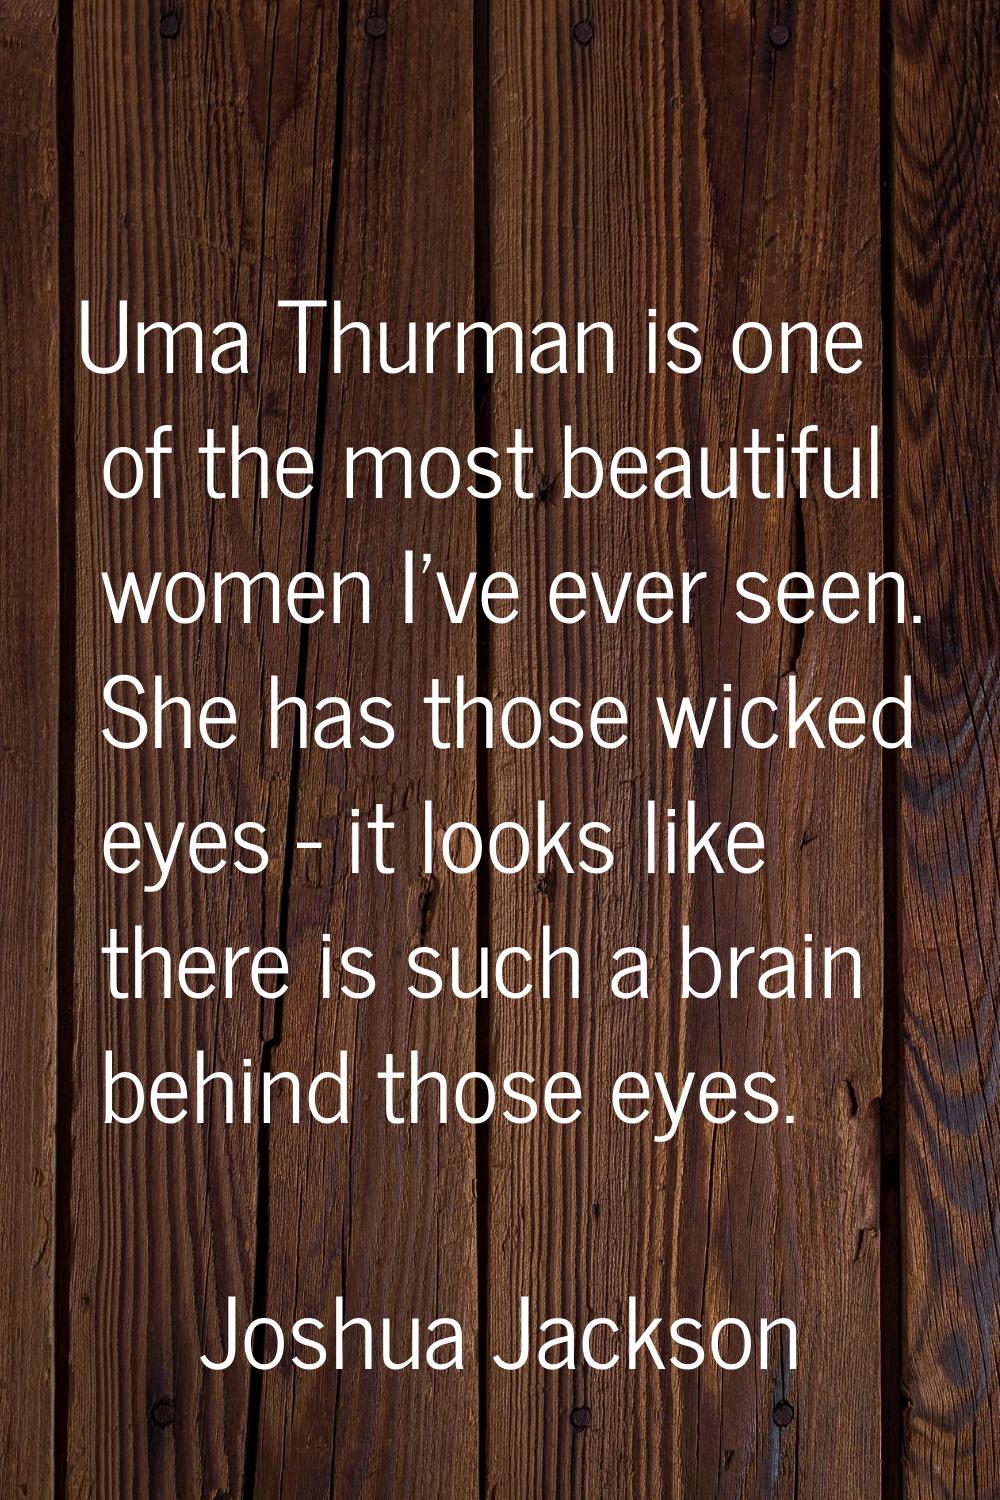 Uma Thurman is one of the most beautiful women I've ever seen. She has those wicked eyes - it looks